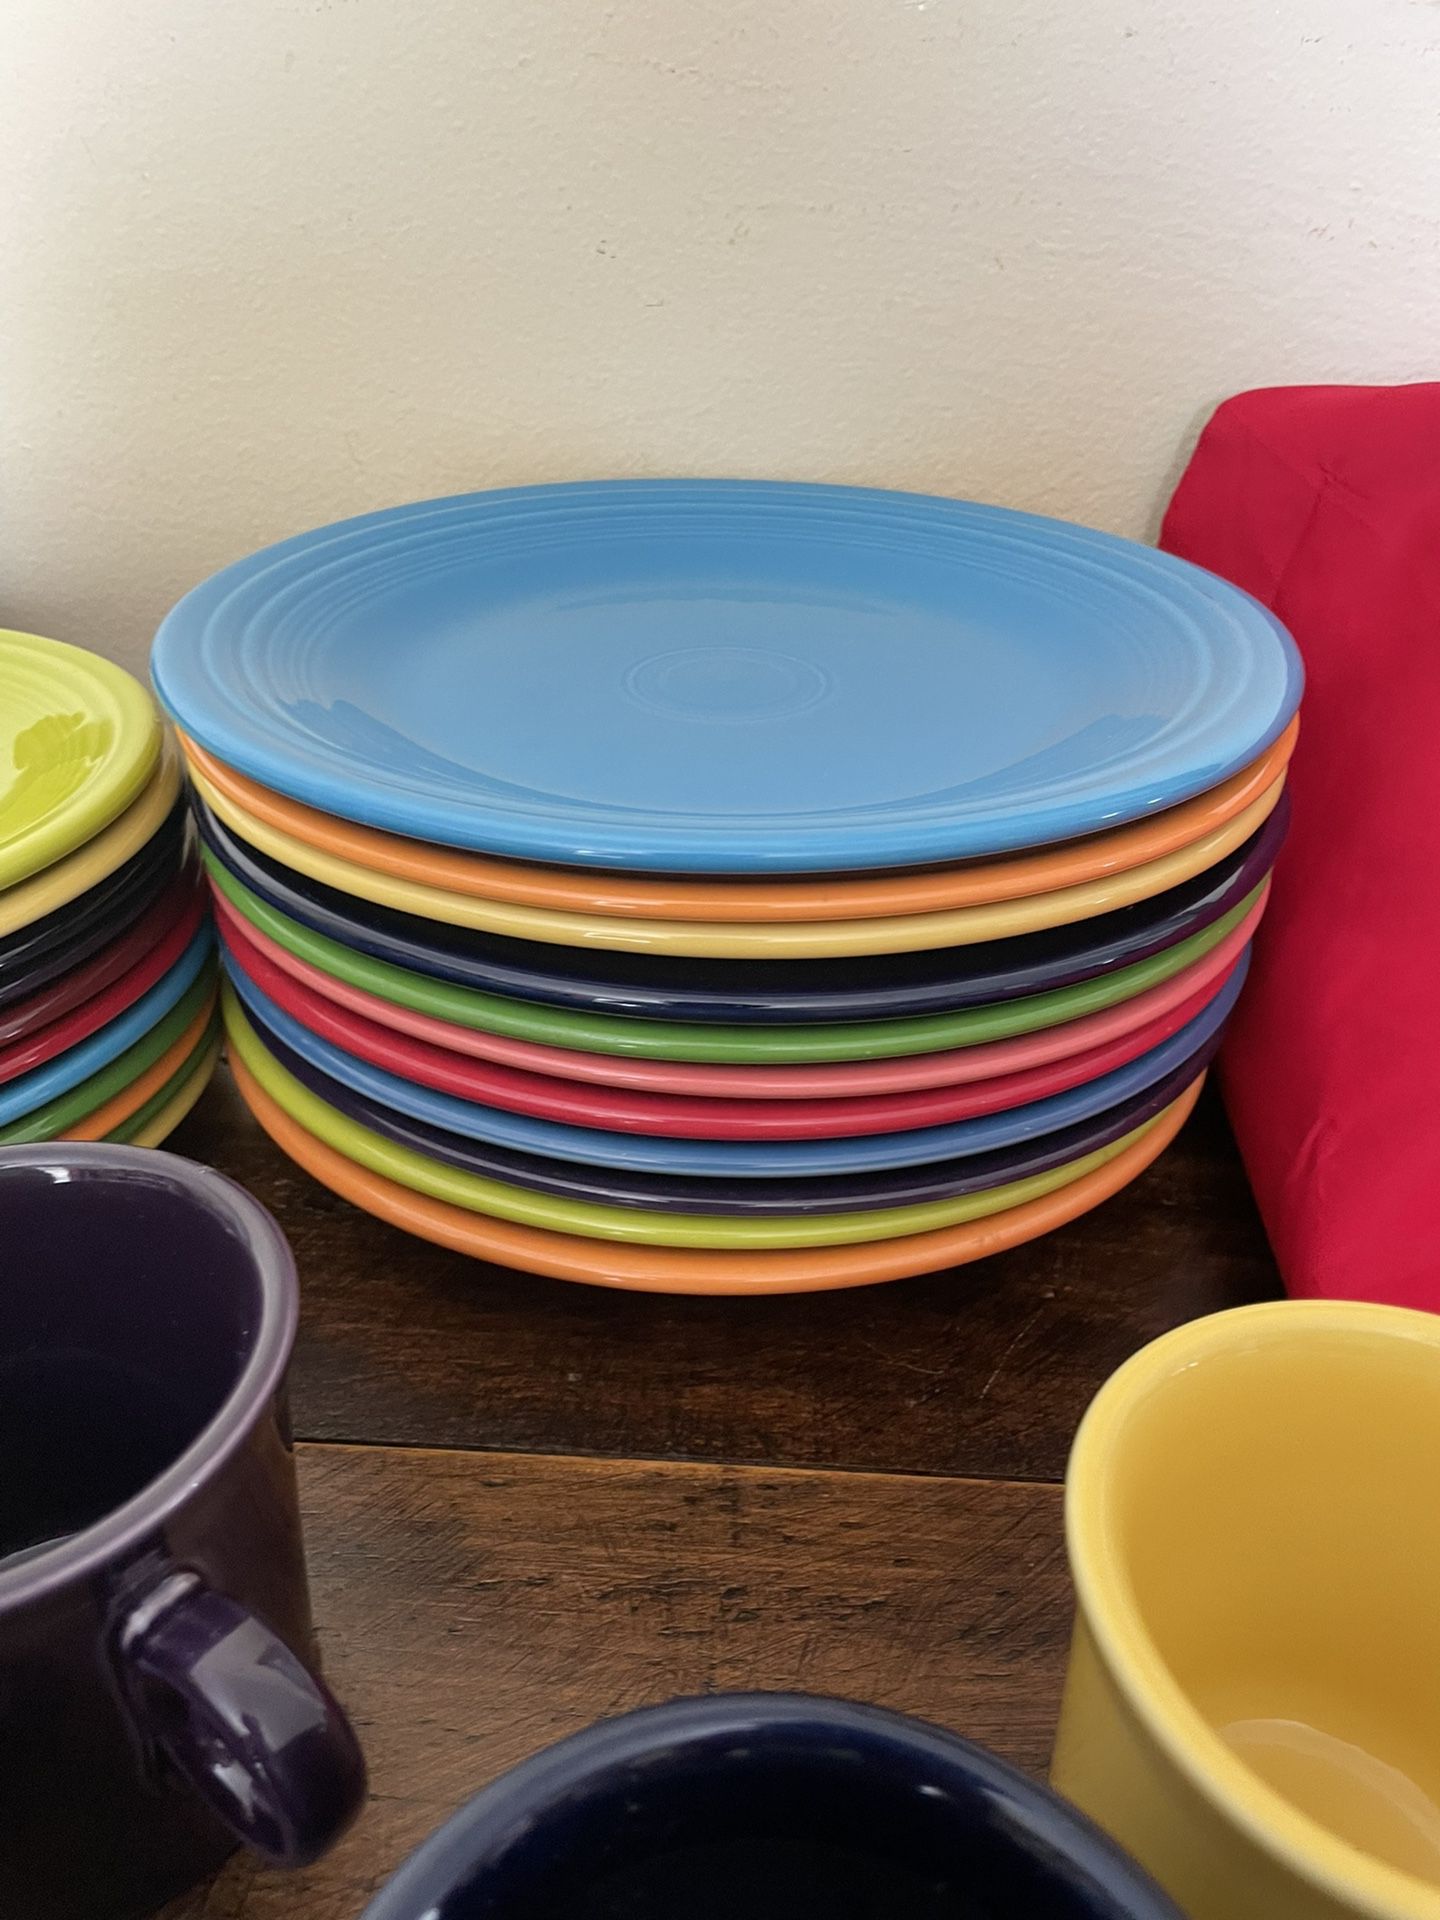  Fiesta  Dishes ,Dinner Plates $10.00 each, Salad Plates  $5.00 each, Cereal Bowls $8.00 each Cups/mugs $5.00 each, See More Pictures 